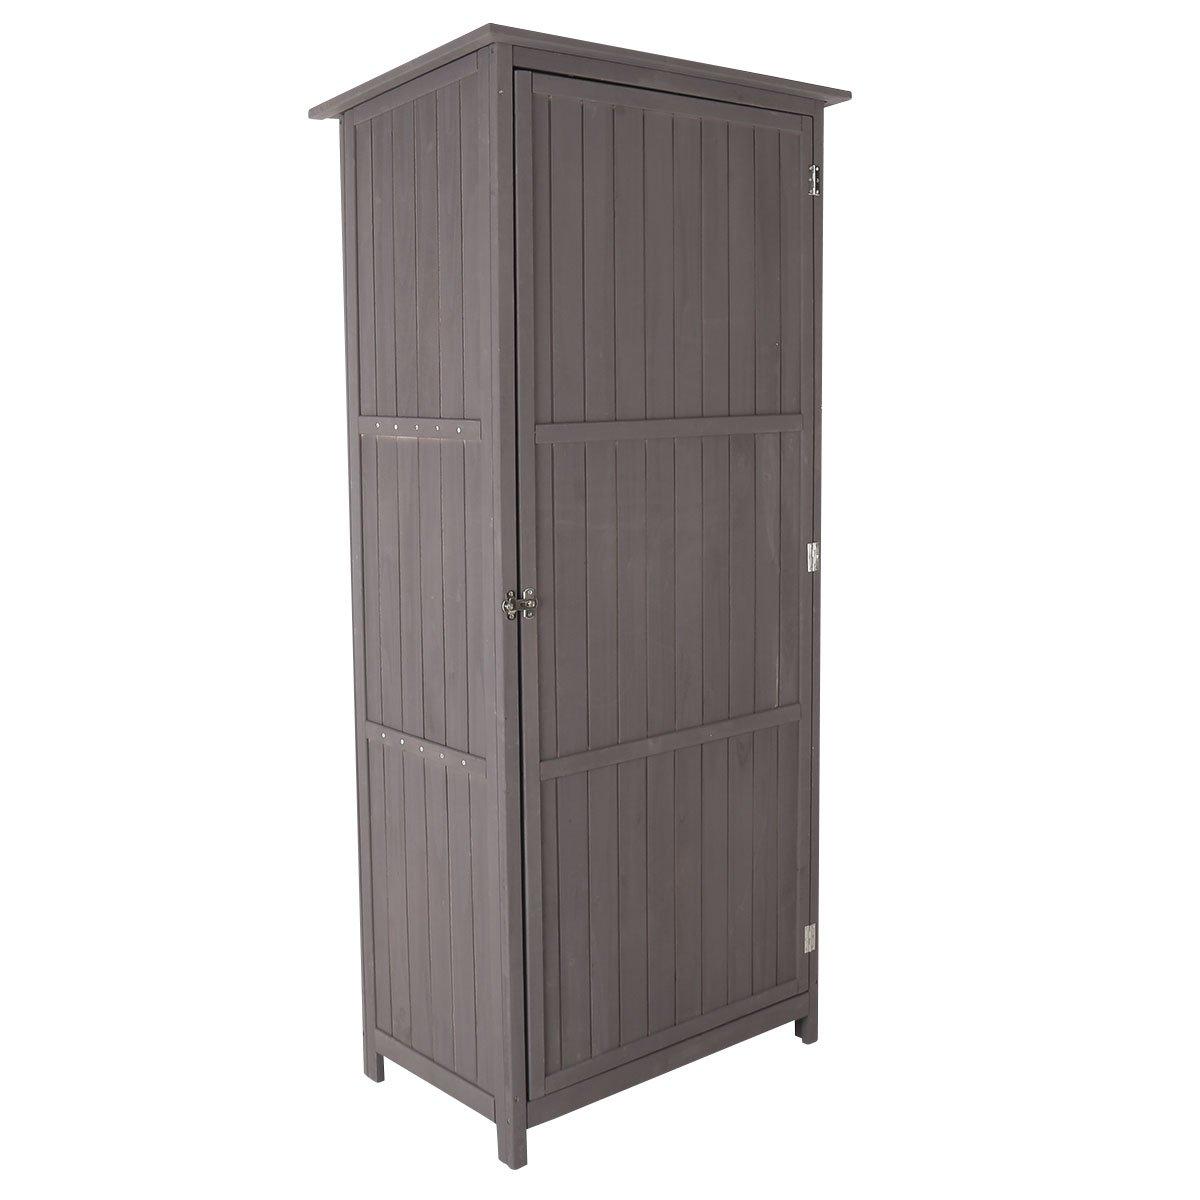 Wooden Storage Shed - Grey H190 x D56 x W86cm Tall Outdoor